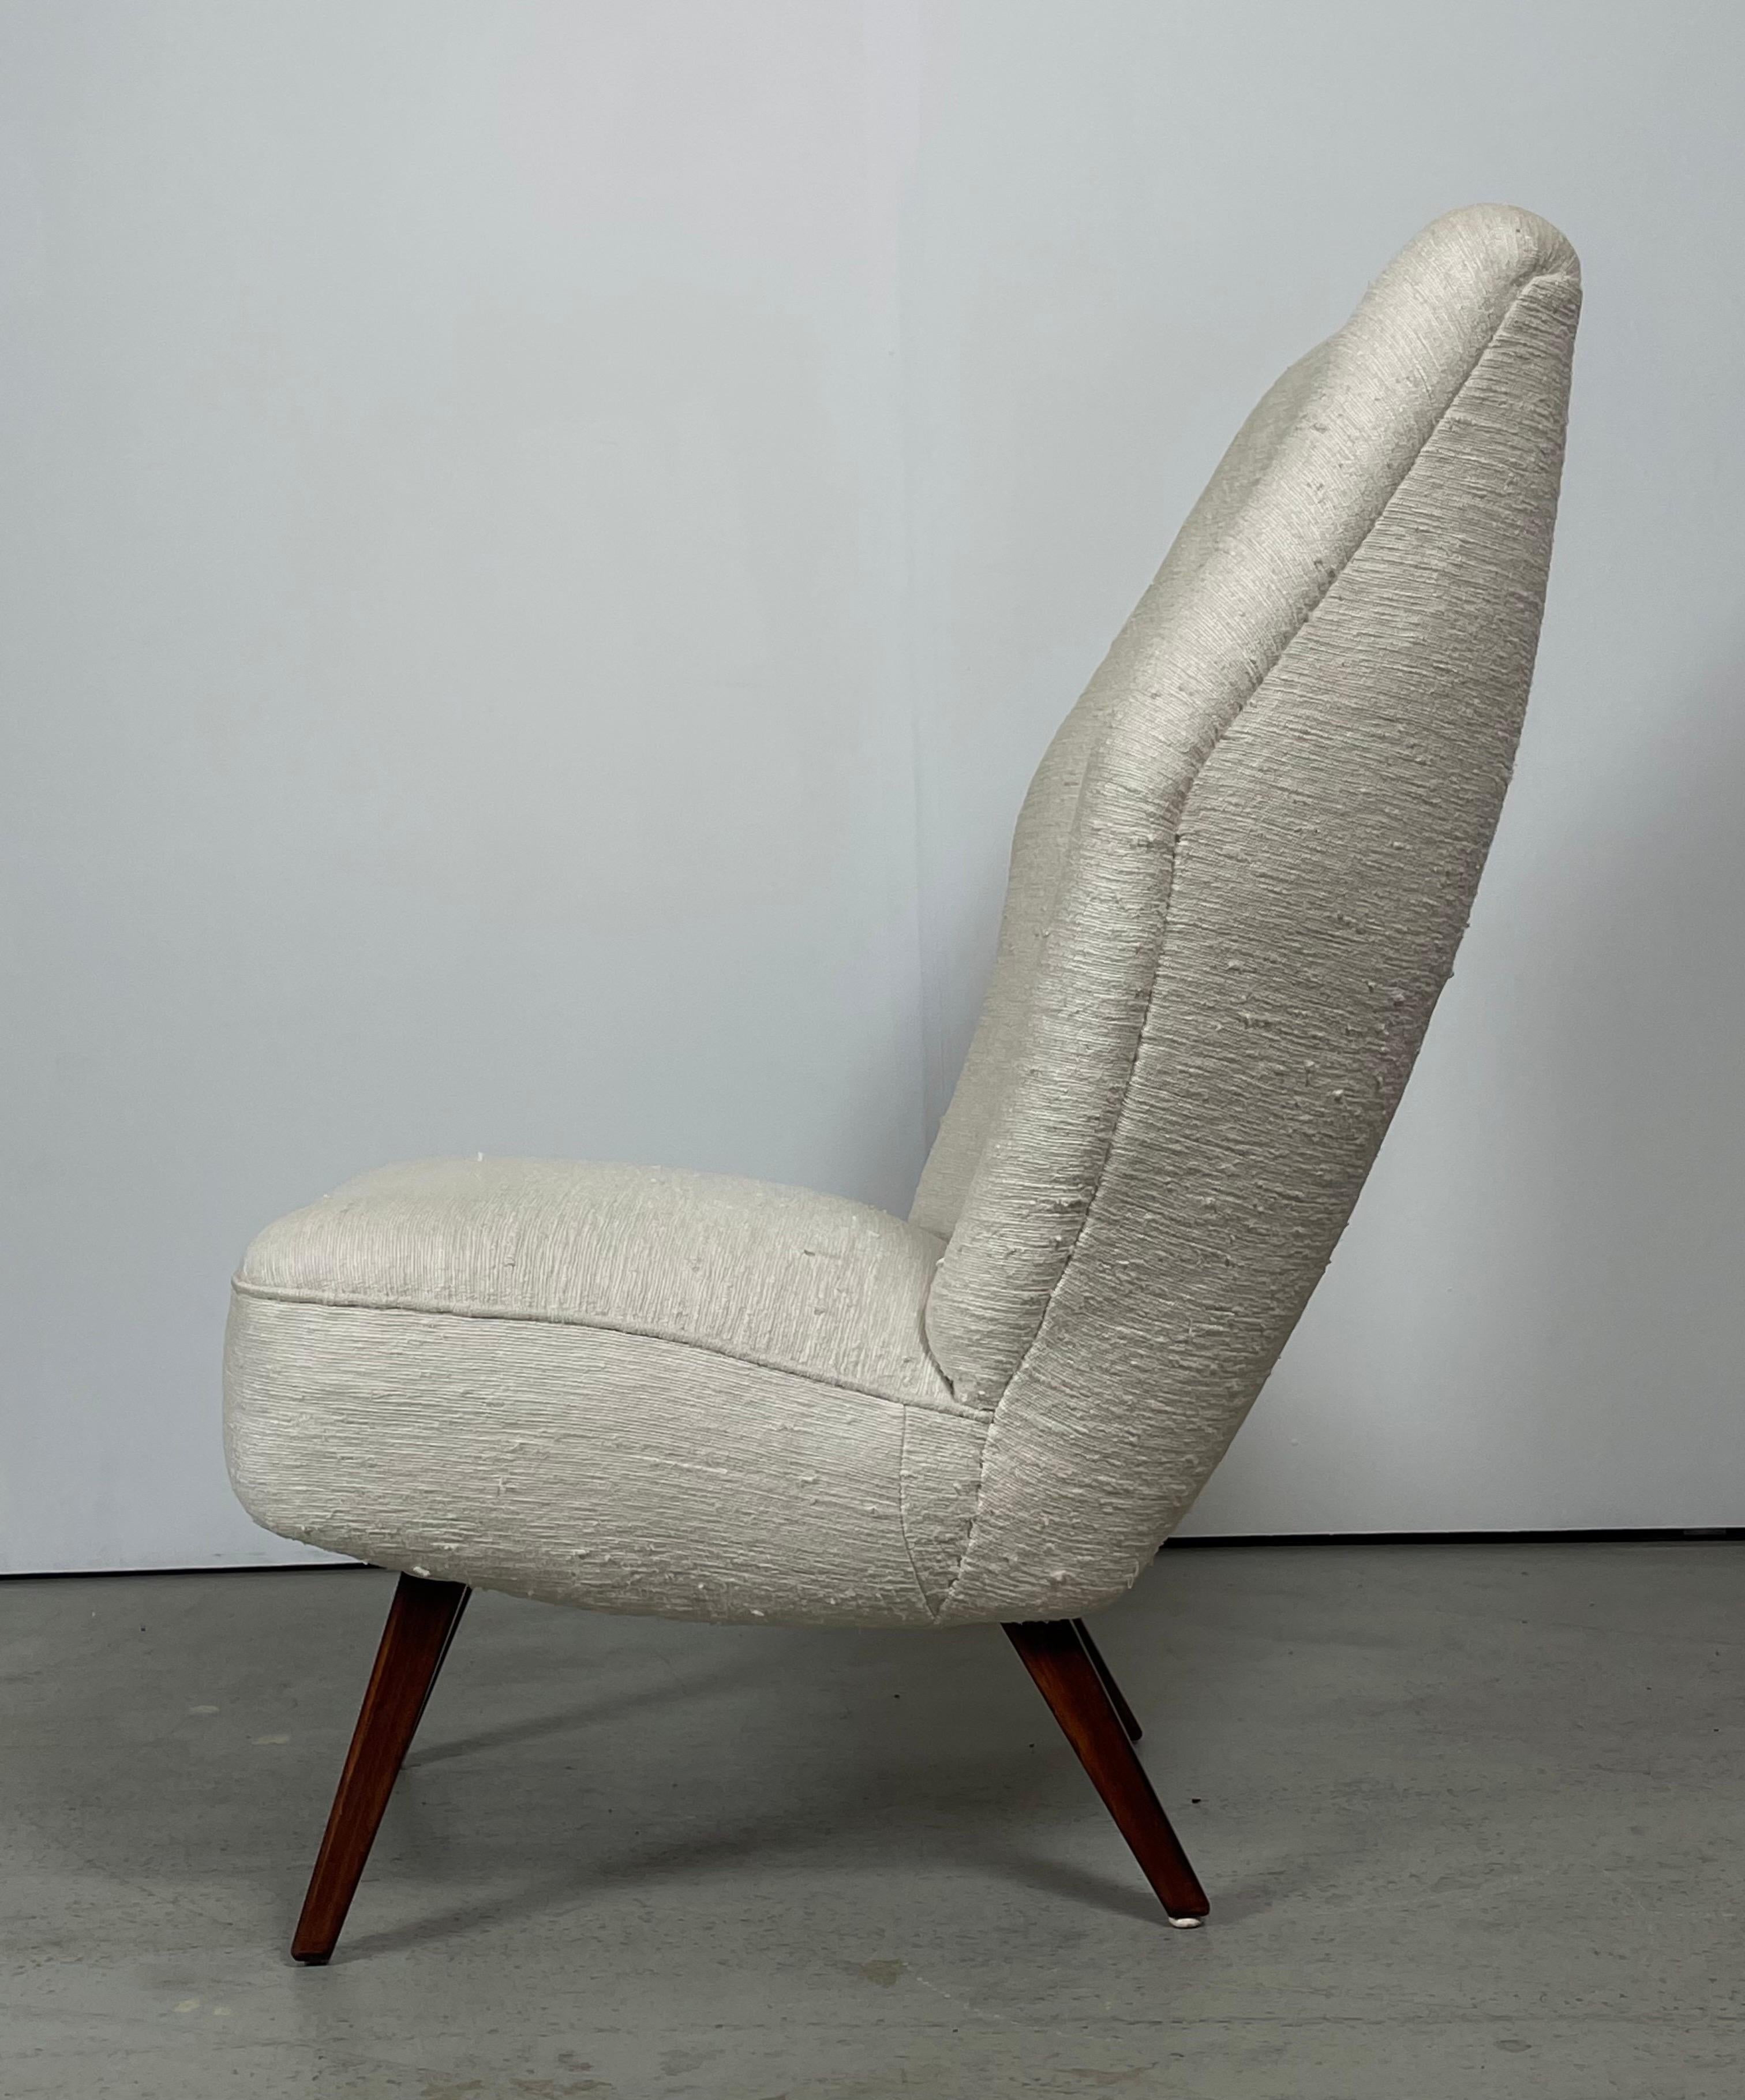 A rare high back chair in very elegant and comfortable design. Manufactured in Denmark durng the 1930s - 1940s. The conditions is vintage and still very good and firm. The previous owner has renew the upholstery in a silk-woolen fabric (off-white).